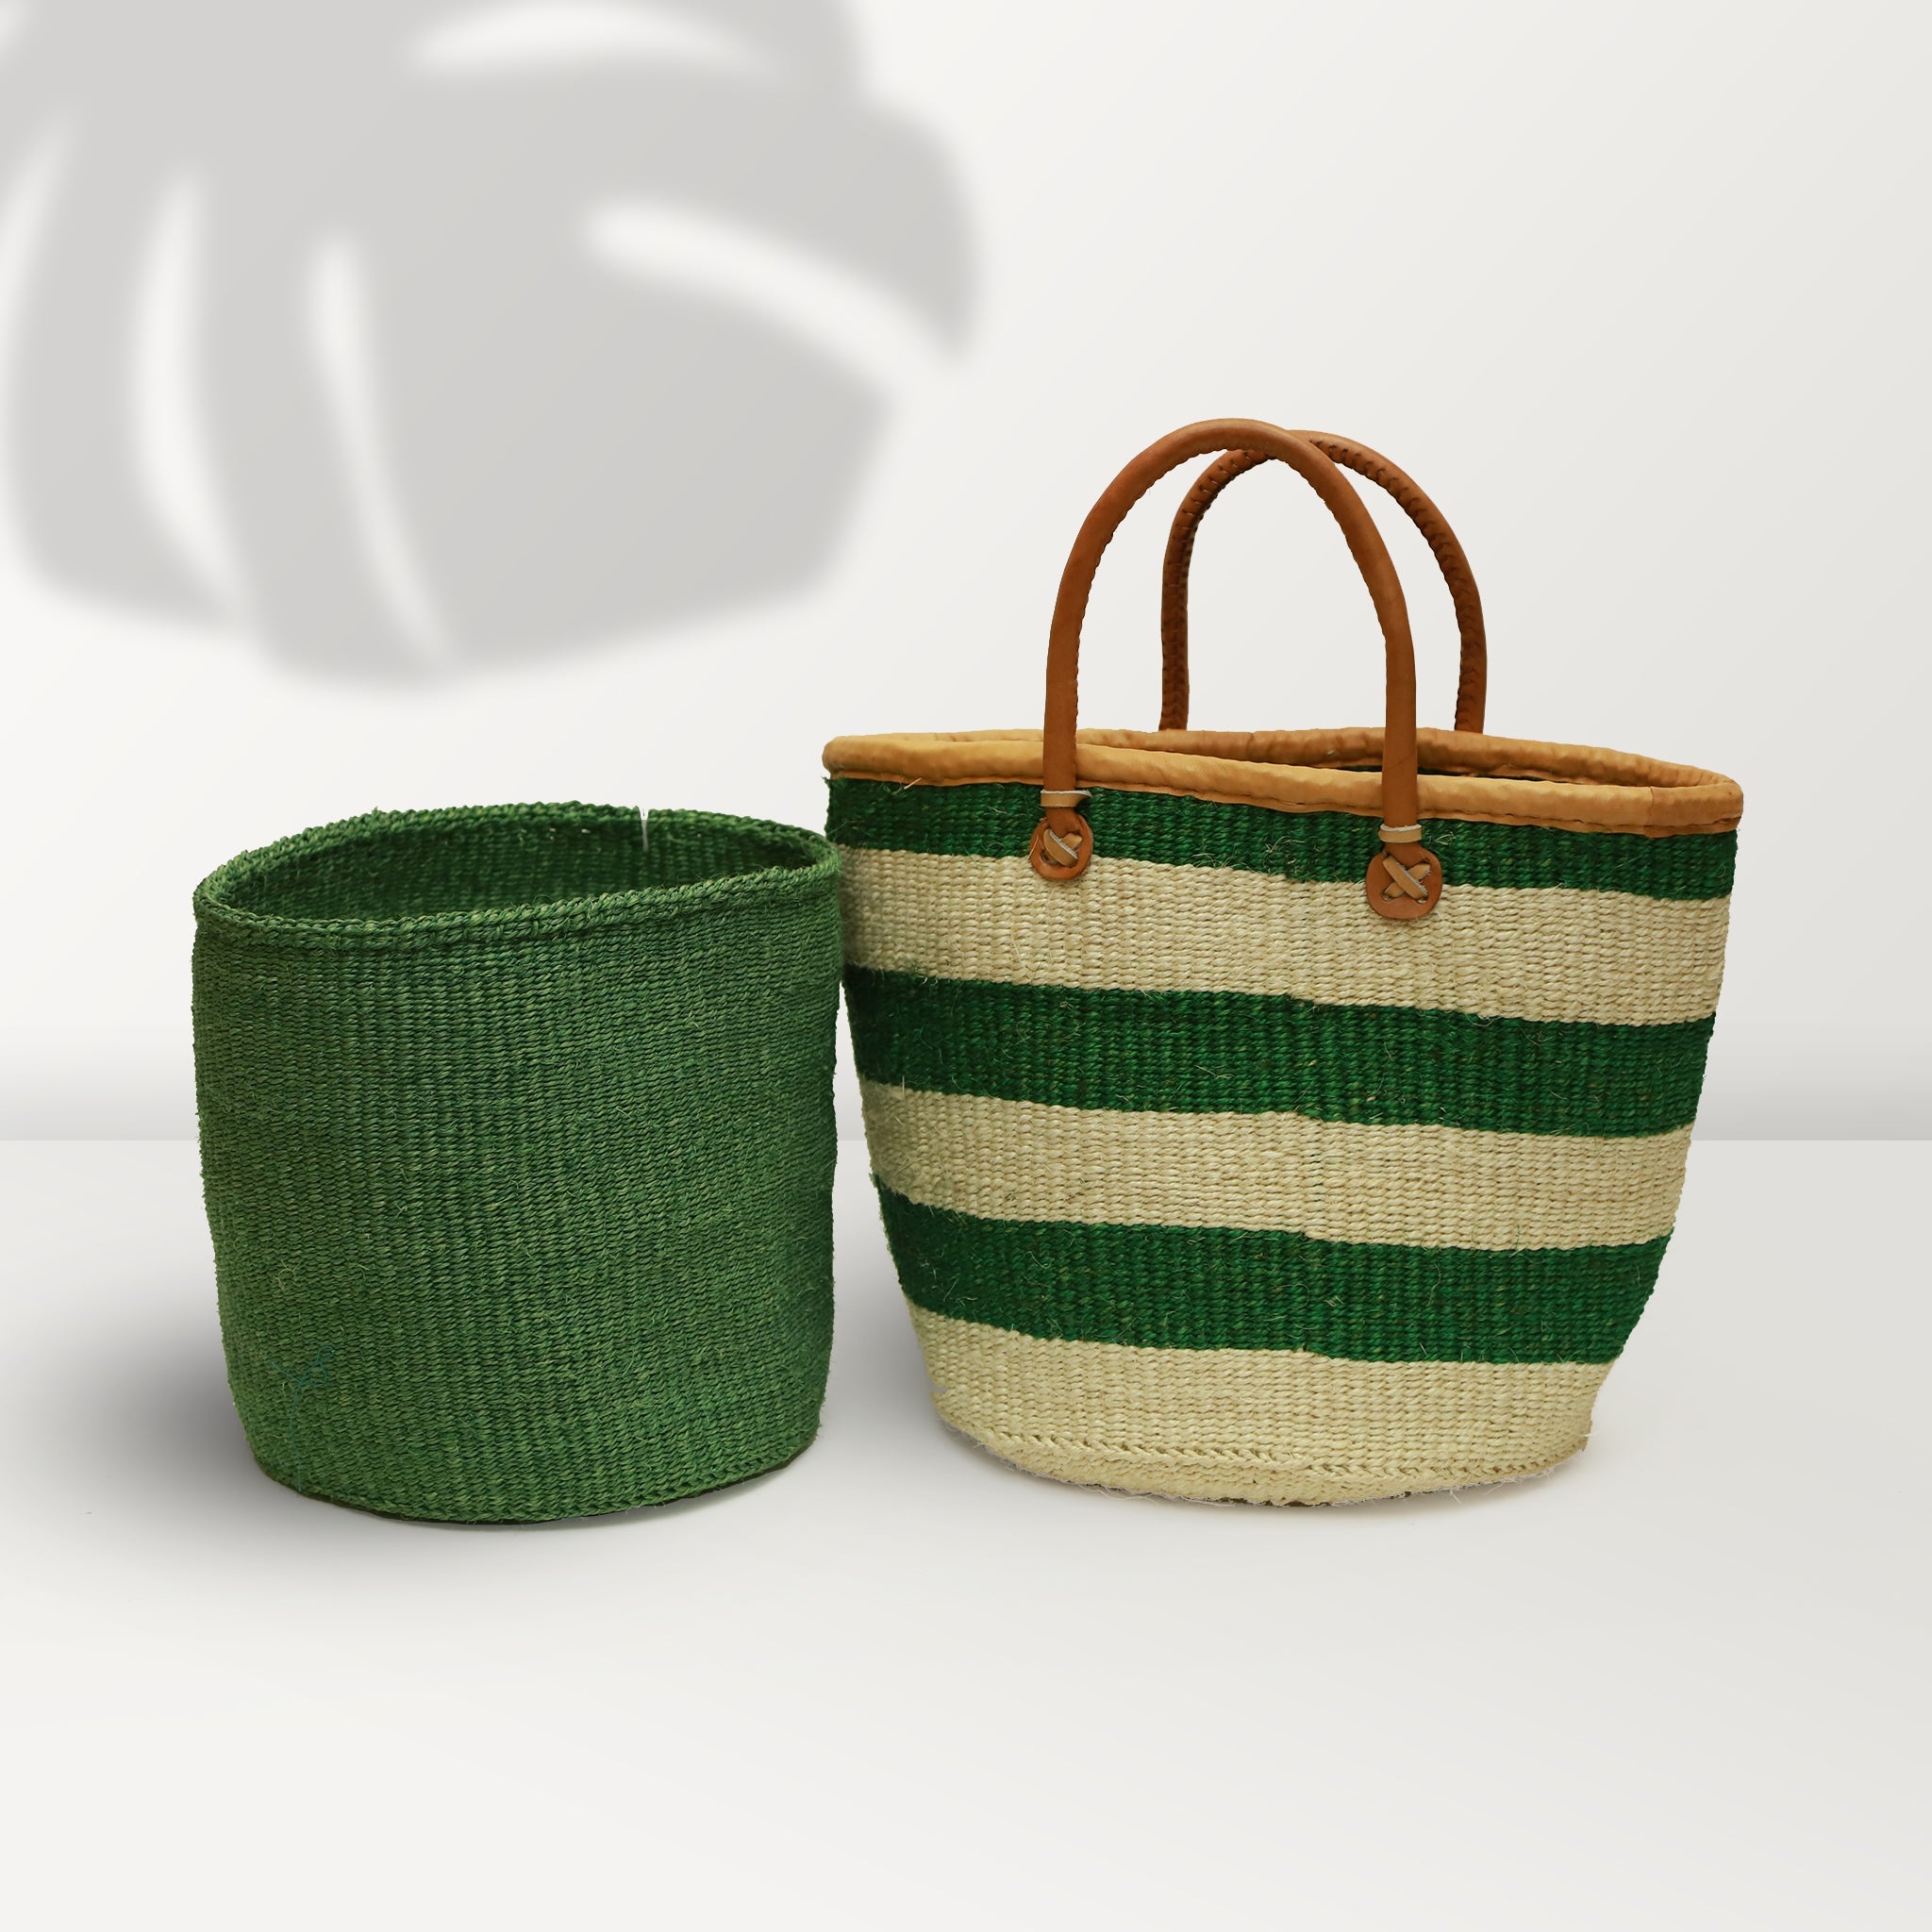 Handwoven Basket with handles for Storage set